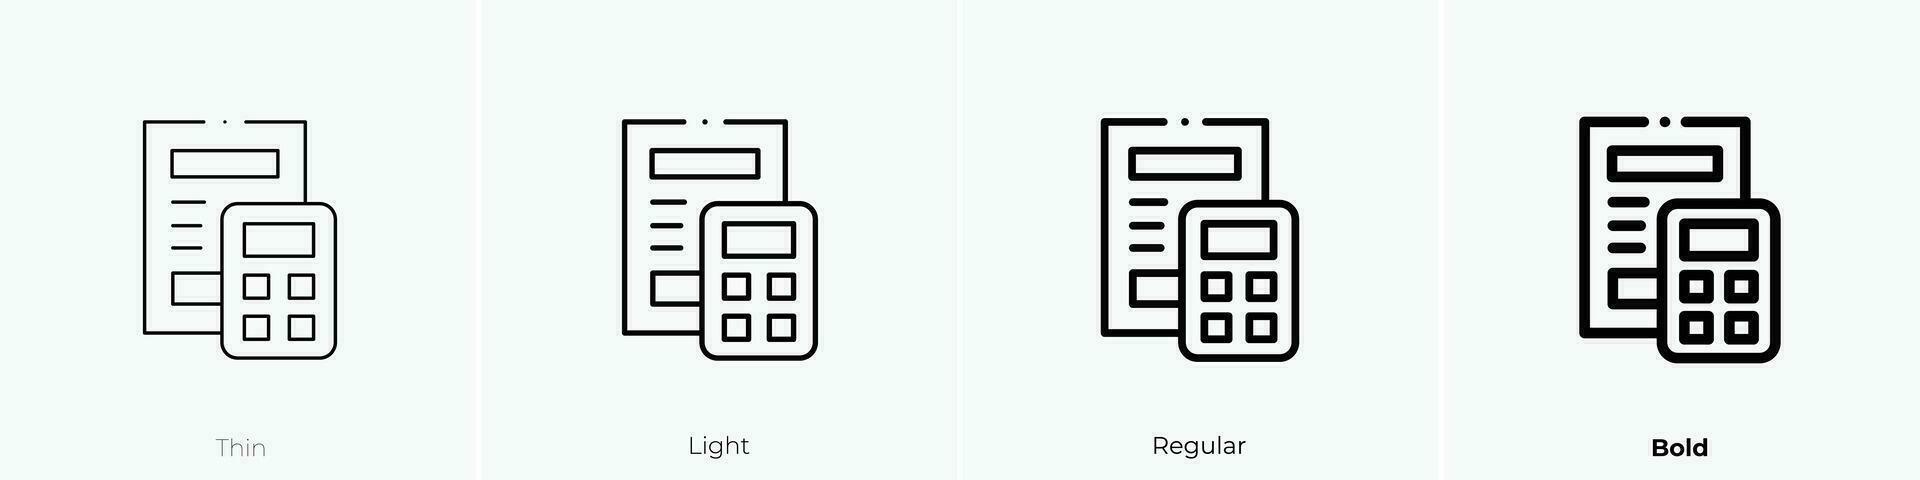 accounting icon. Thin, Light, Regular And Bold style design isolated on white background vector